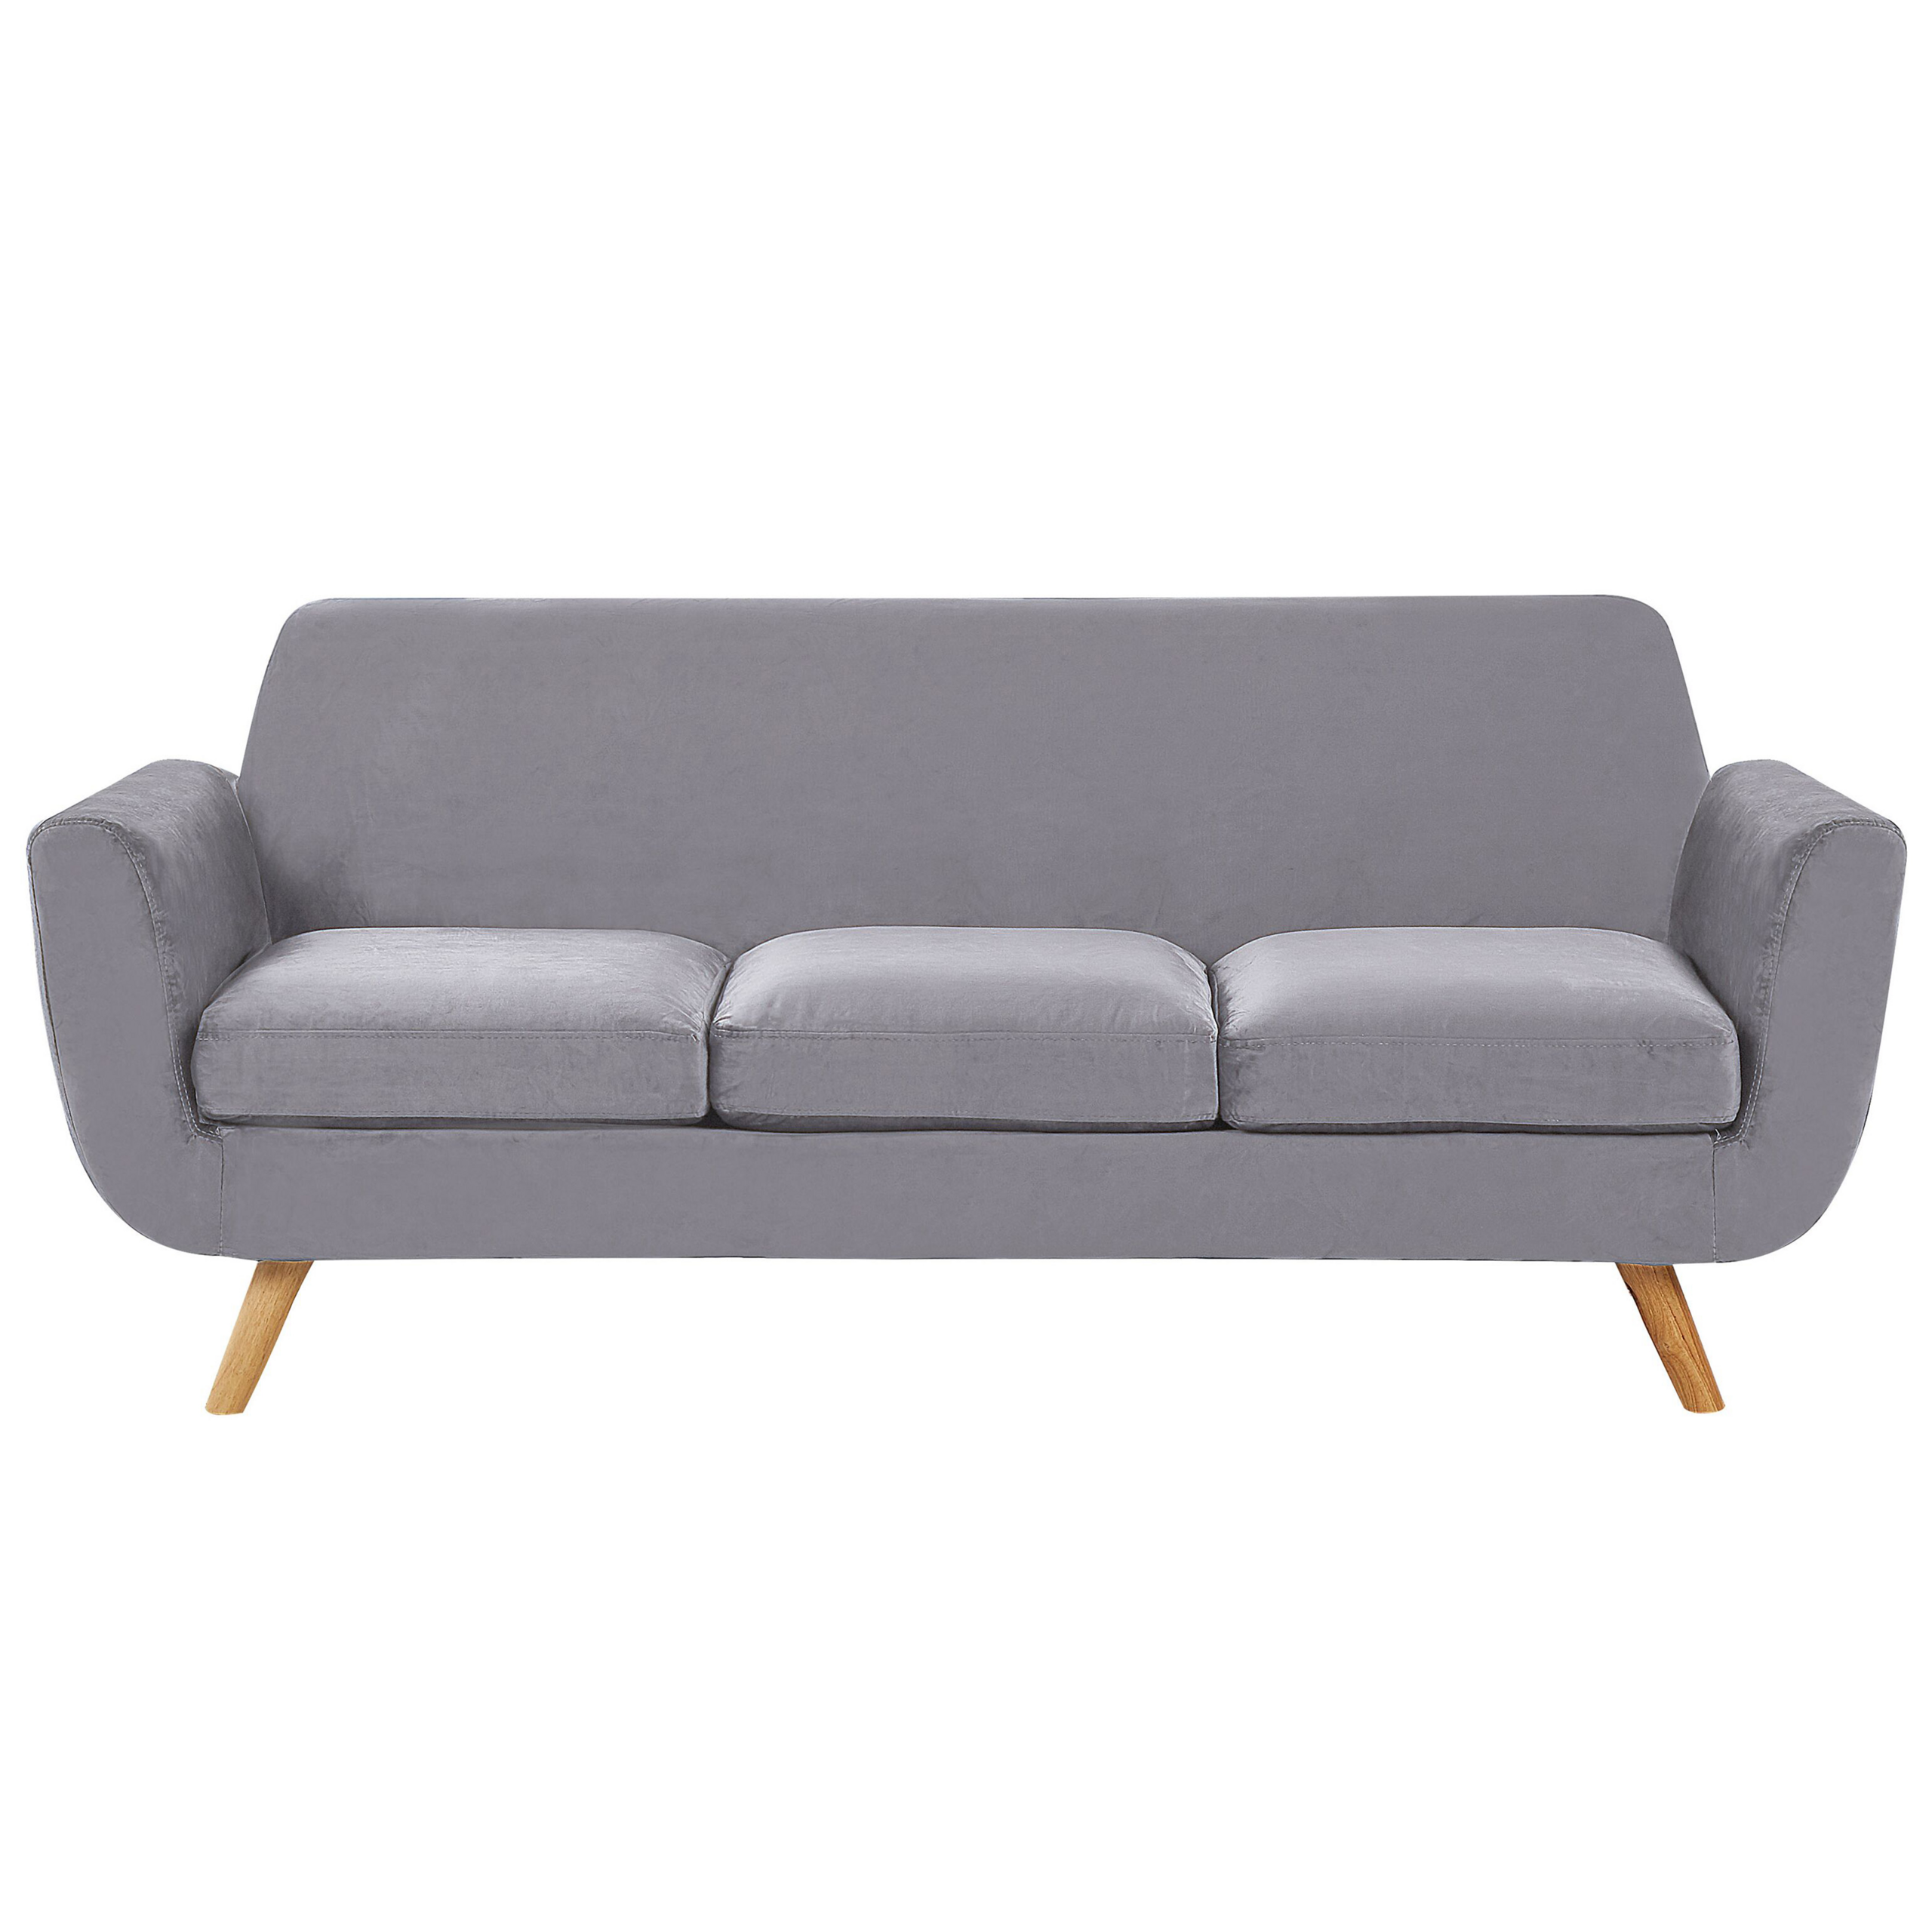 Beliani 3 Seater Sofa Grey Velvet Upholstery on Slanted Wooden Legs with Removable Cover Retro Style